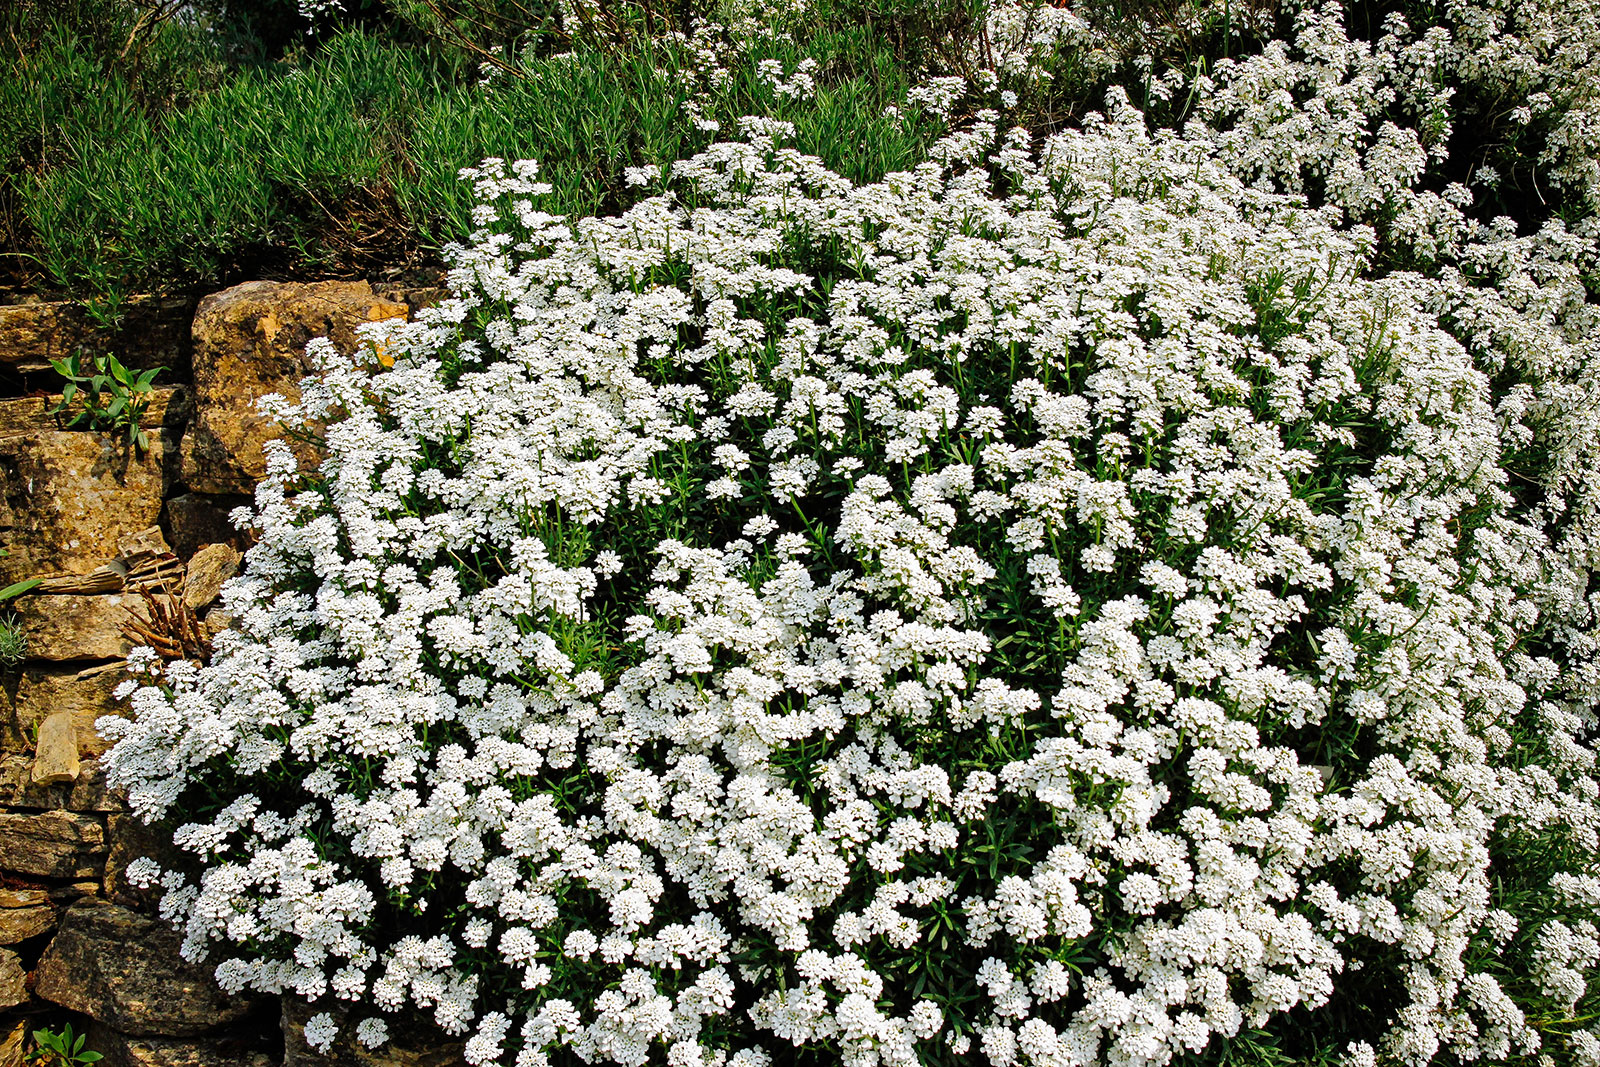 Candytuft covered in a dense mat of white flowers